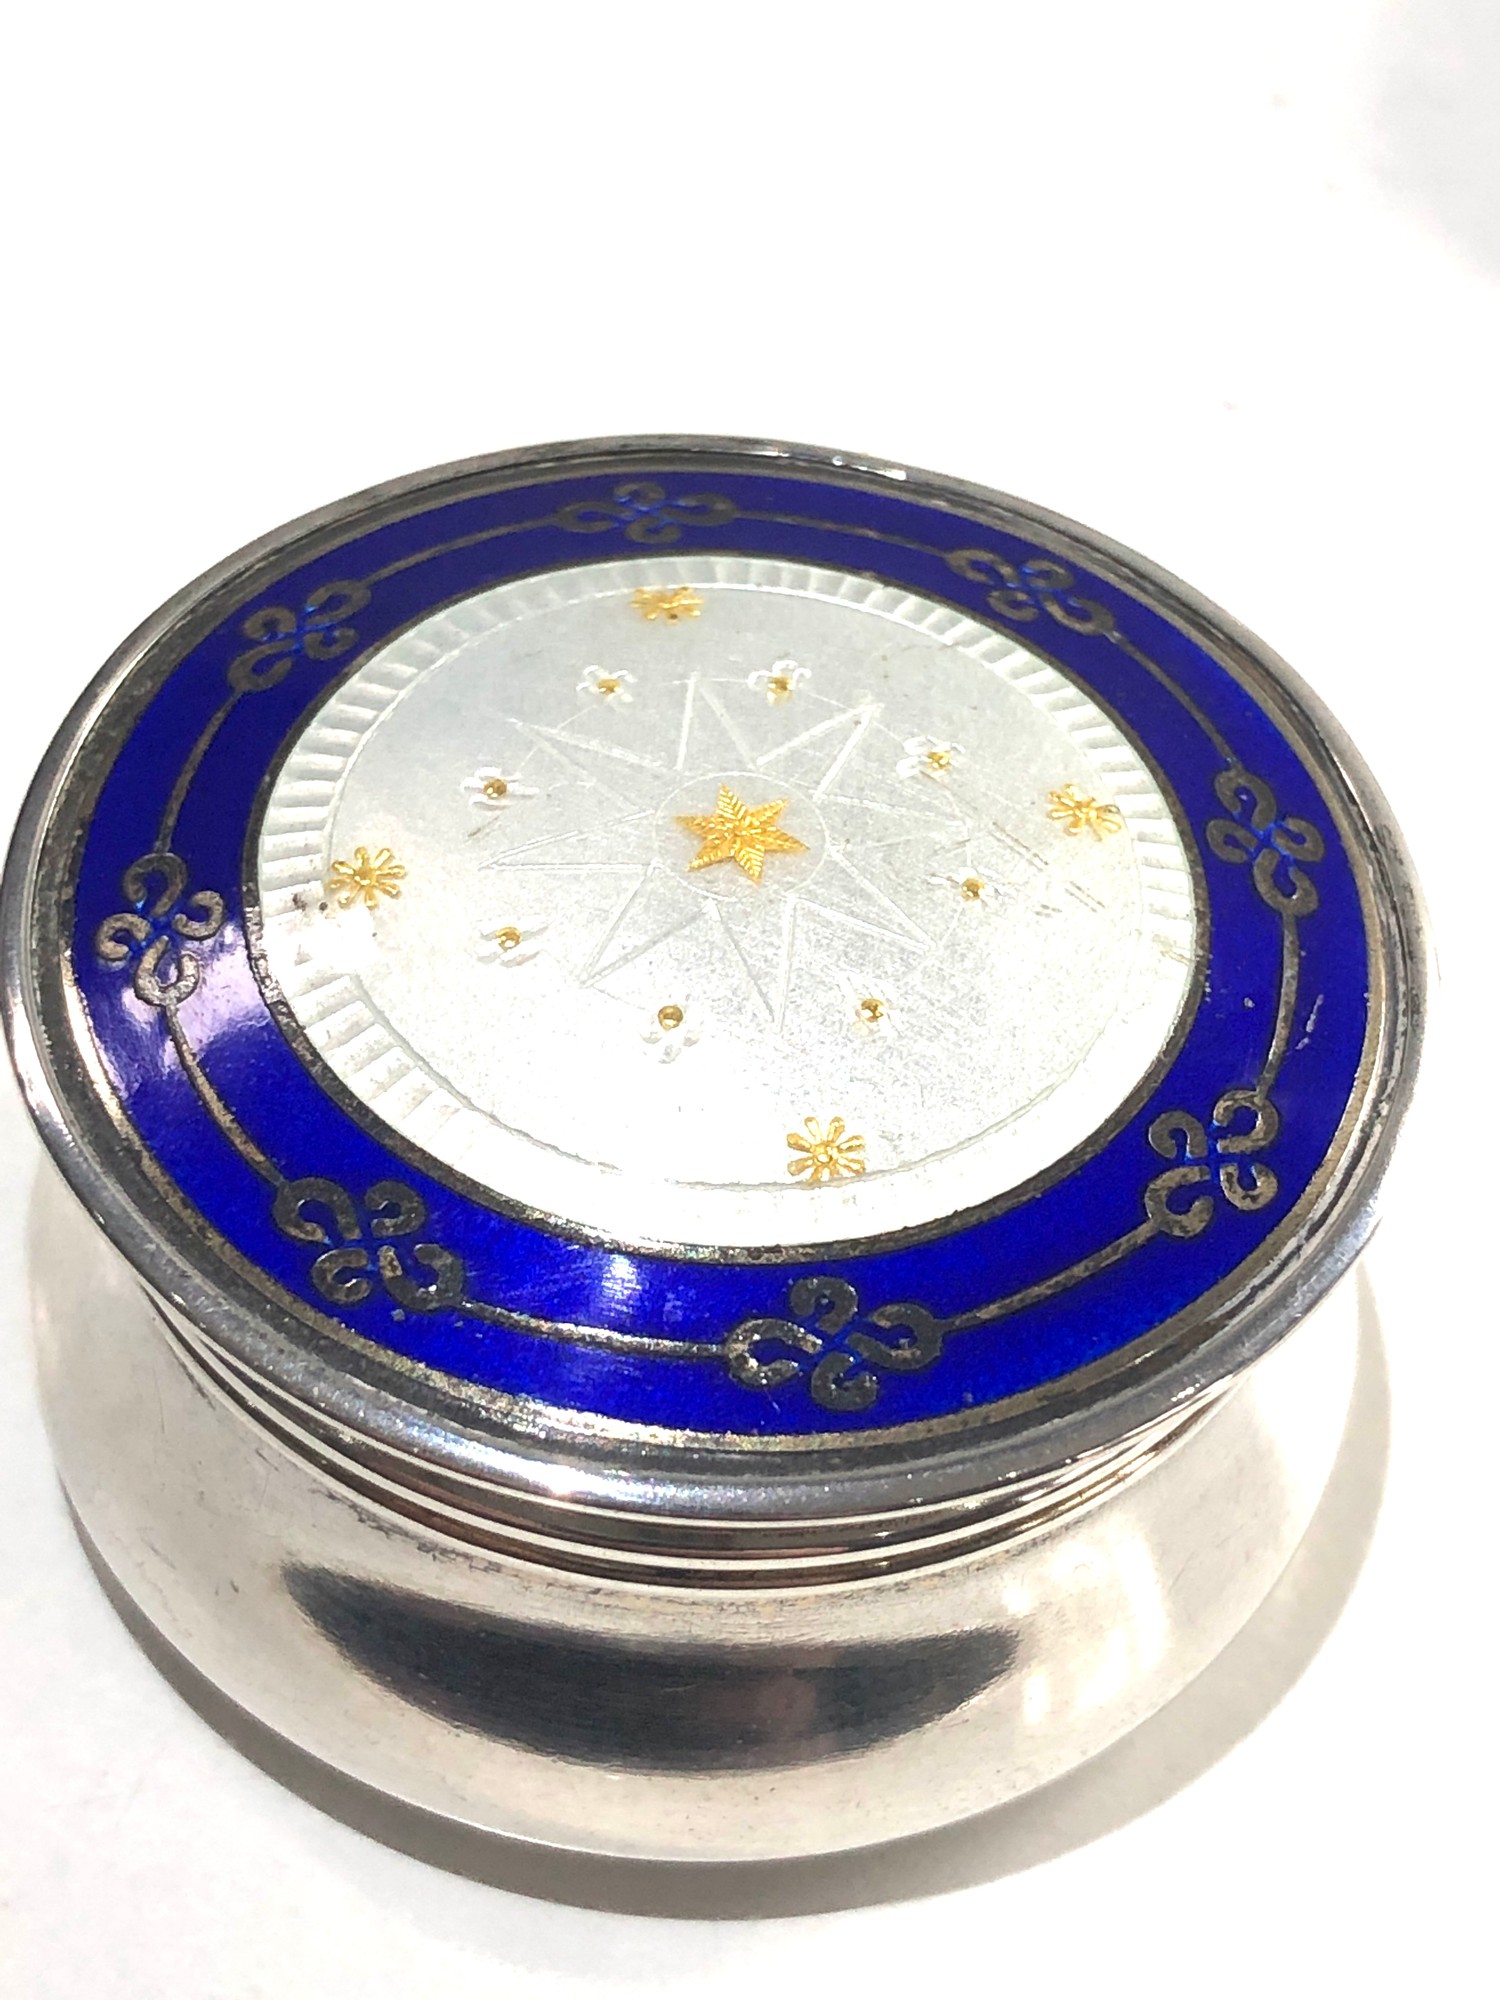 2 Antique Silver & guilloche enamel lid Pill Boxes both have Birmingham silver hallmarks as shown - Image 4 of 6